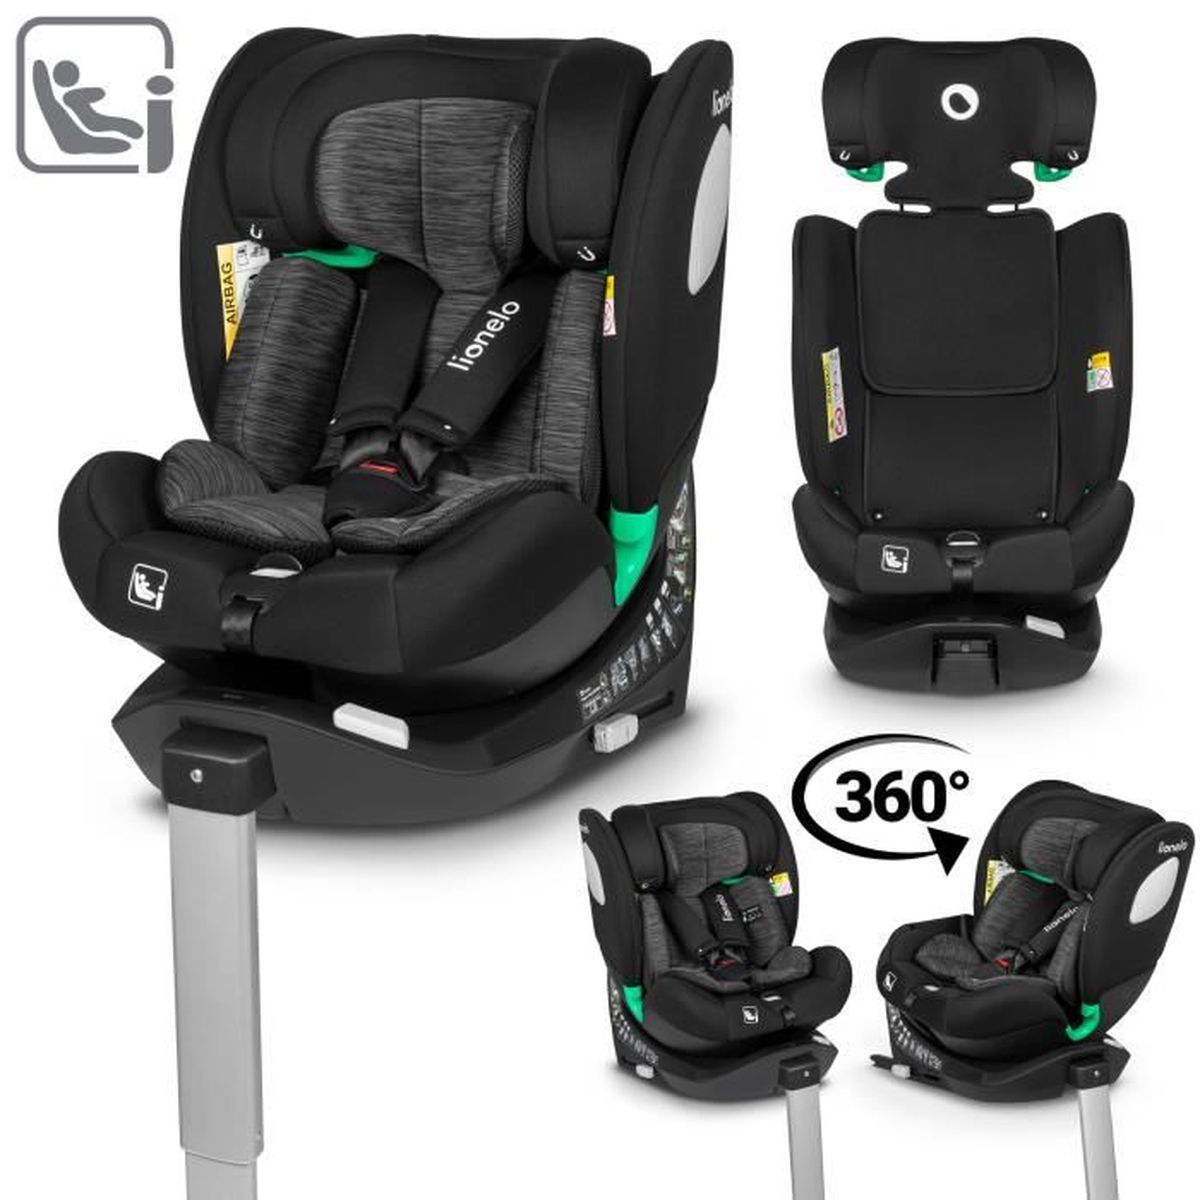 BEBE CONFORT Siège Auto Groupe 1 Pivotant Axiss Robin Red - Achat / Vente siège  auto BEBE CONFORT Siège Axiss Rouge - Cdiscount